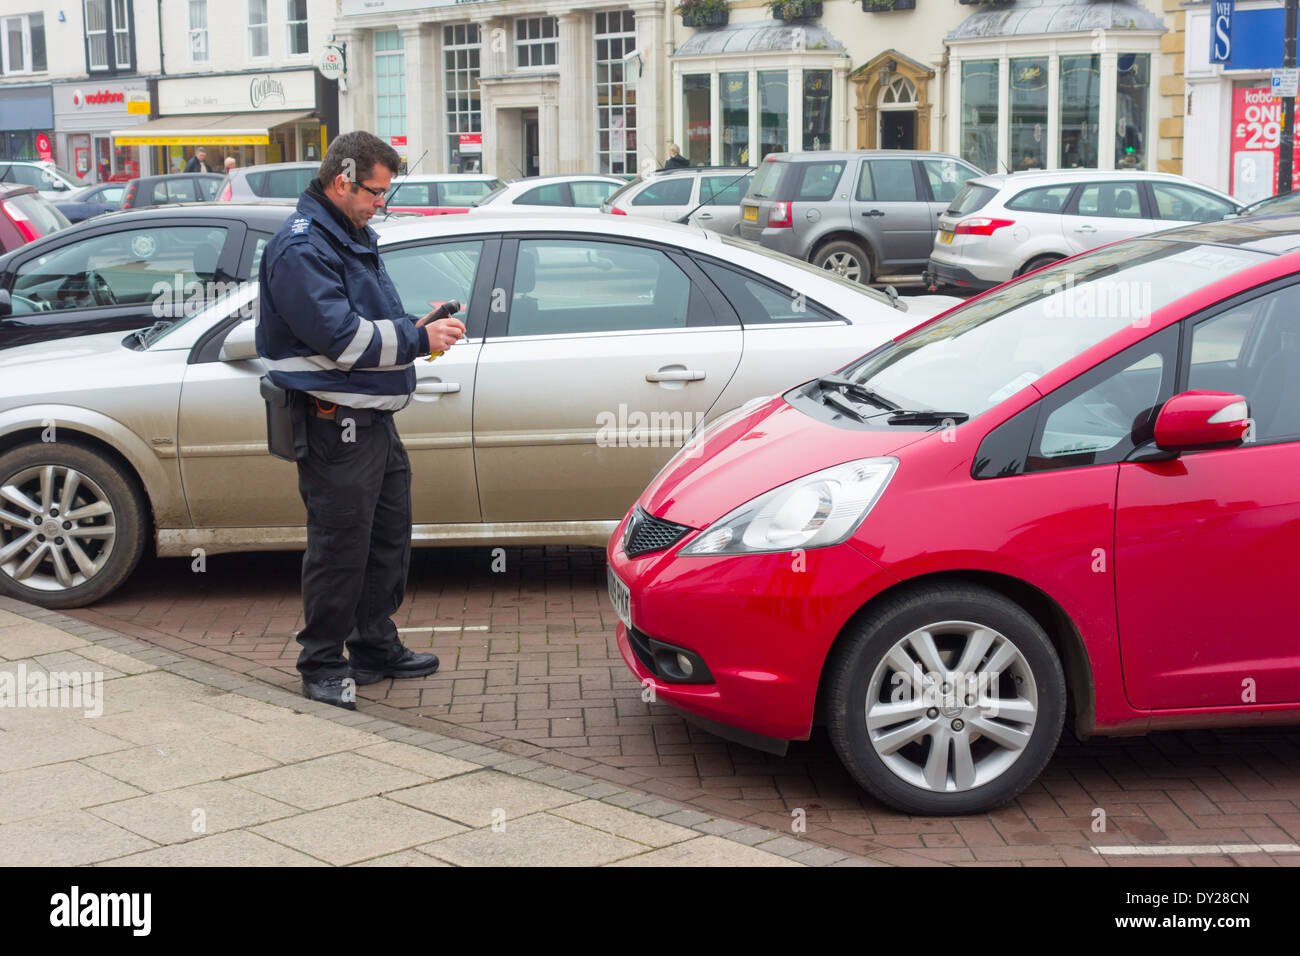 Parking attendant checking the arrival time of a parked car Northallerton North Yorkshire England UK Stock Photo